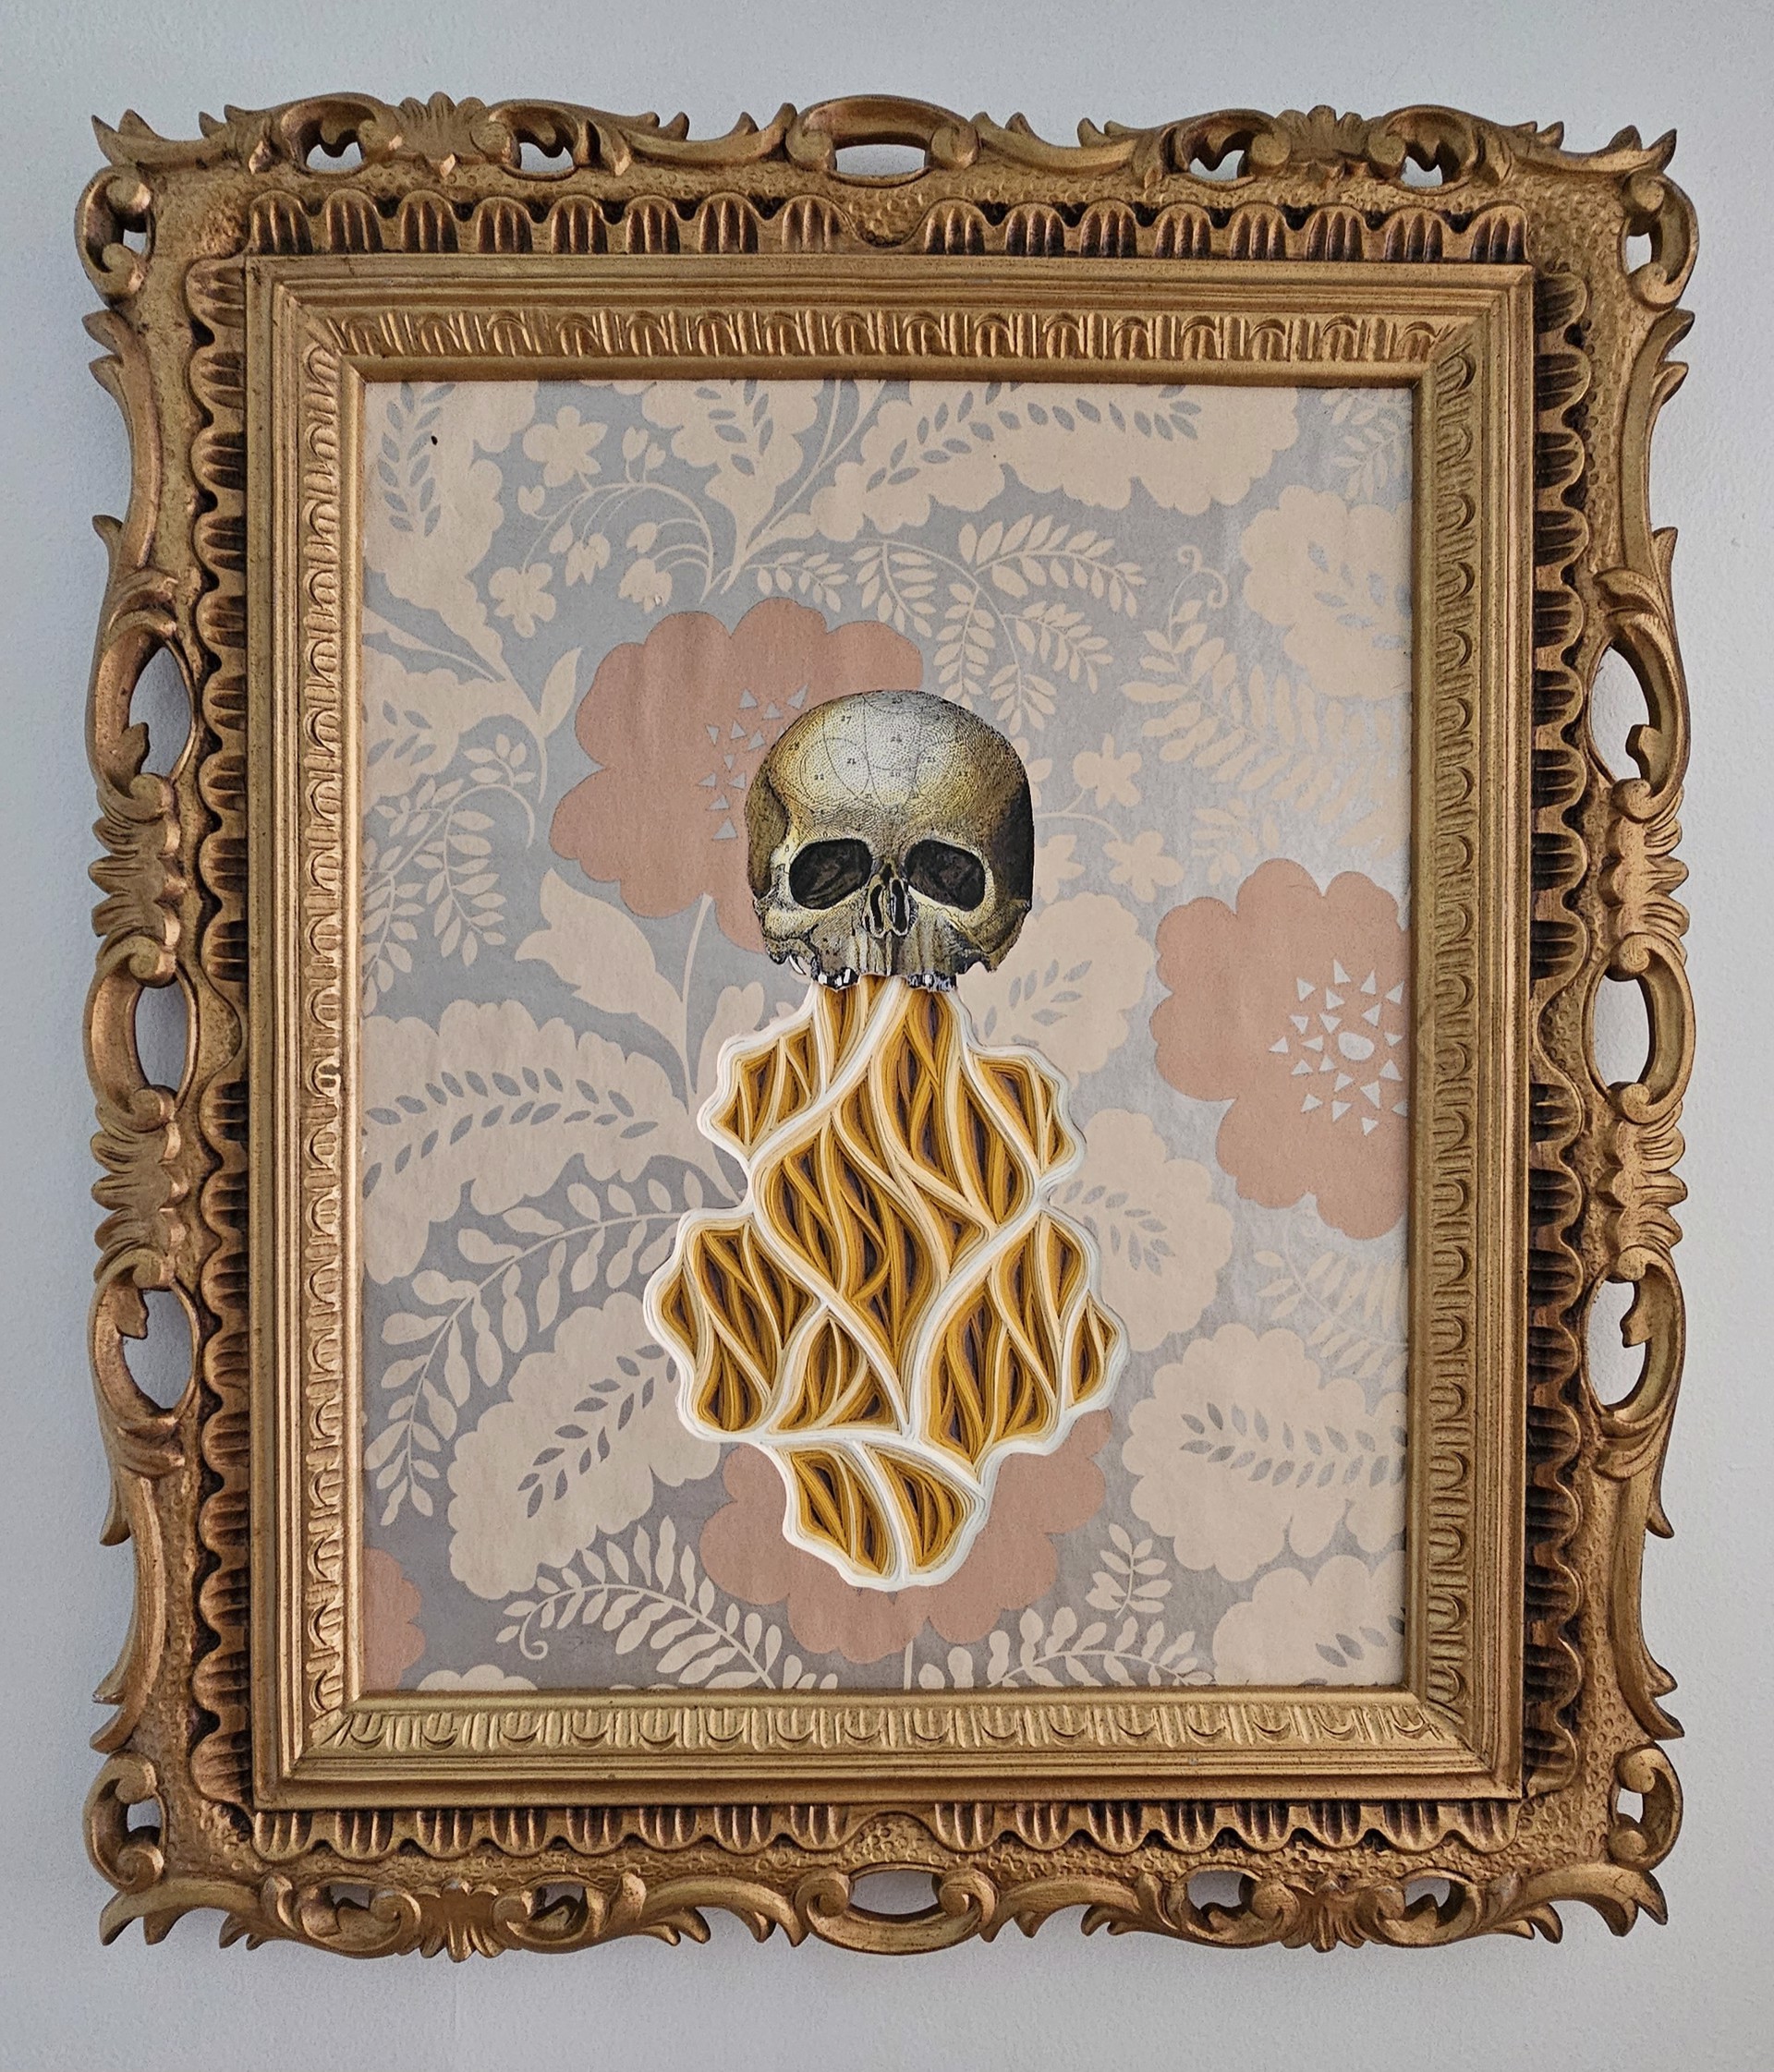 Memento Morididdle Movement #493 (Gold Skull) by Charles Clary